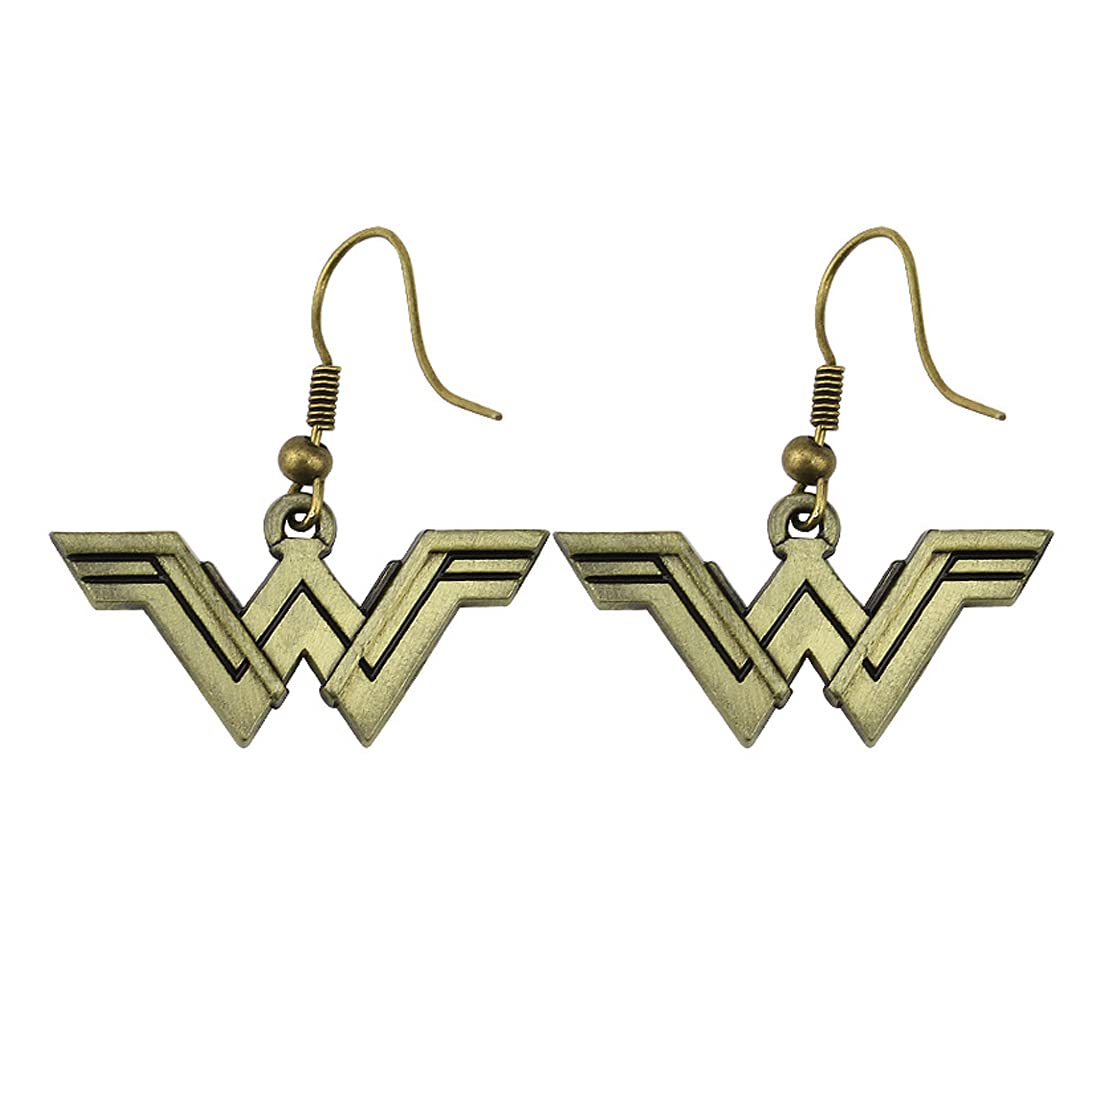 Yellow Chimes Elegant Latest Fashion Gold Plated Wonder Women Design Drop Earrings for Women and Girls, Medium (YCFJER-456AVNG-GL)